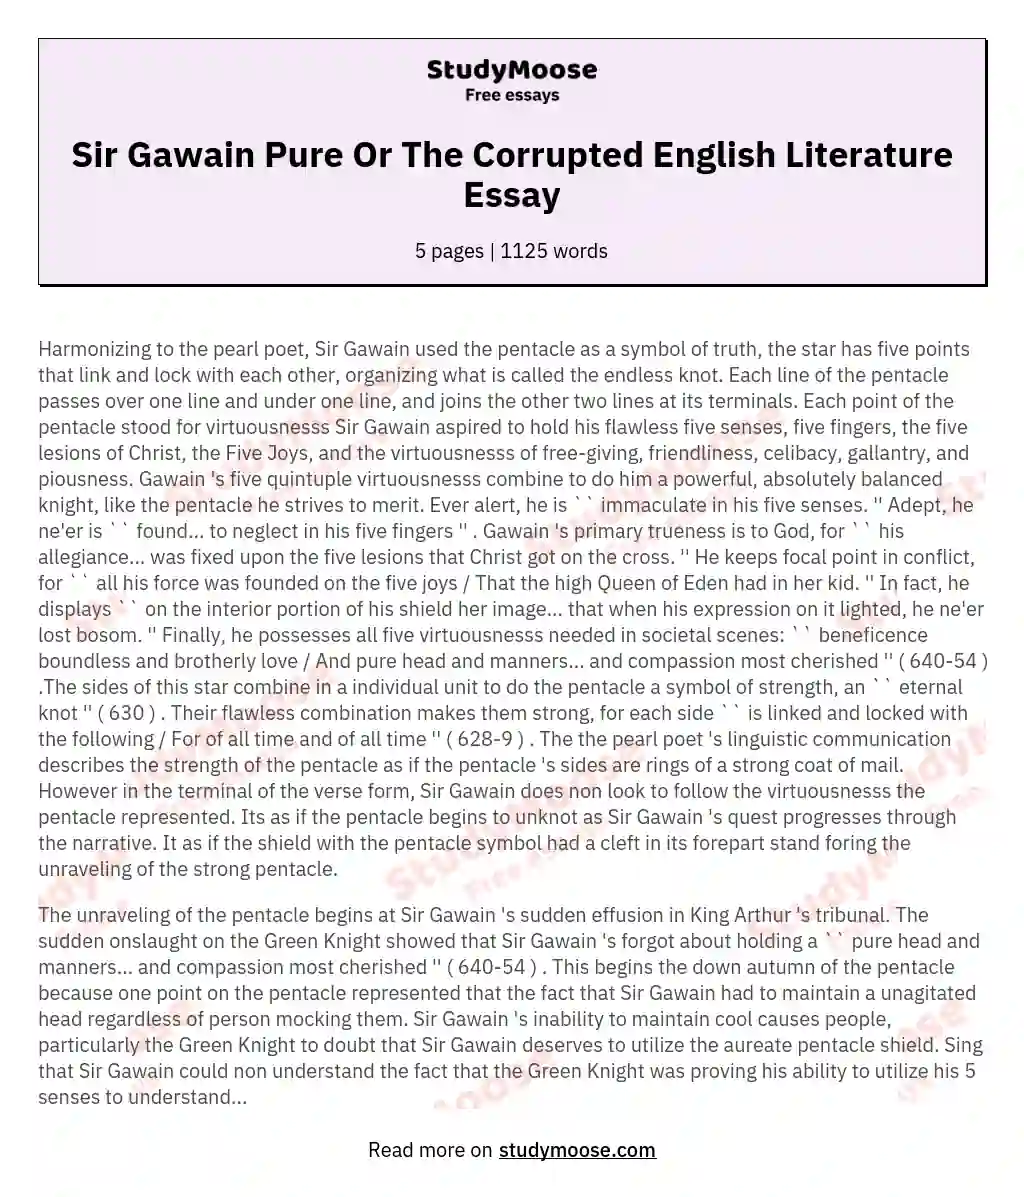 Sir Gawain Pure Or The Corrupted English Literature Essay essay